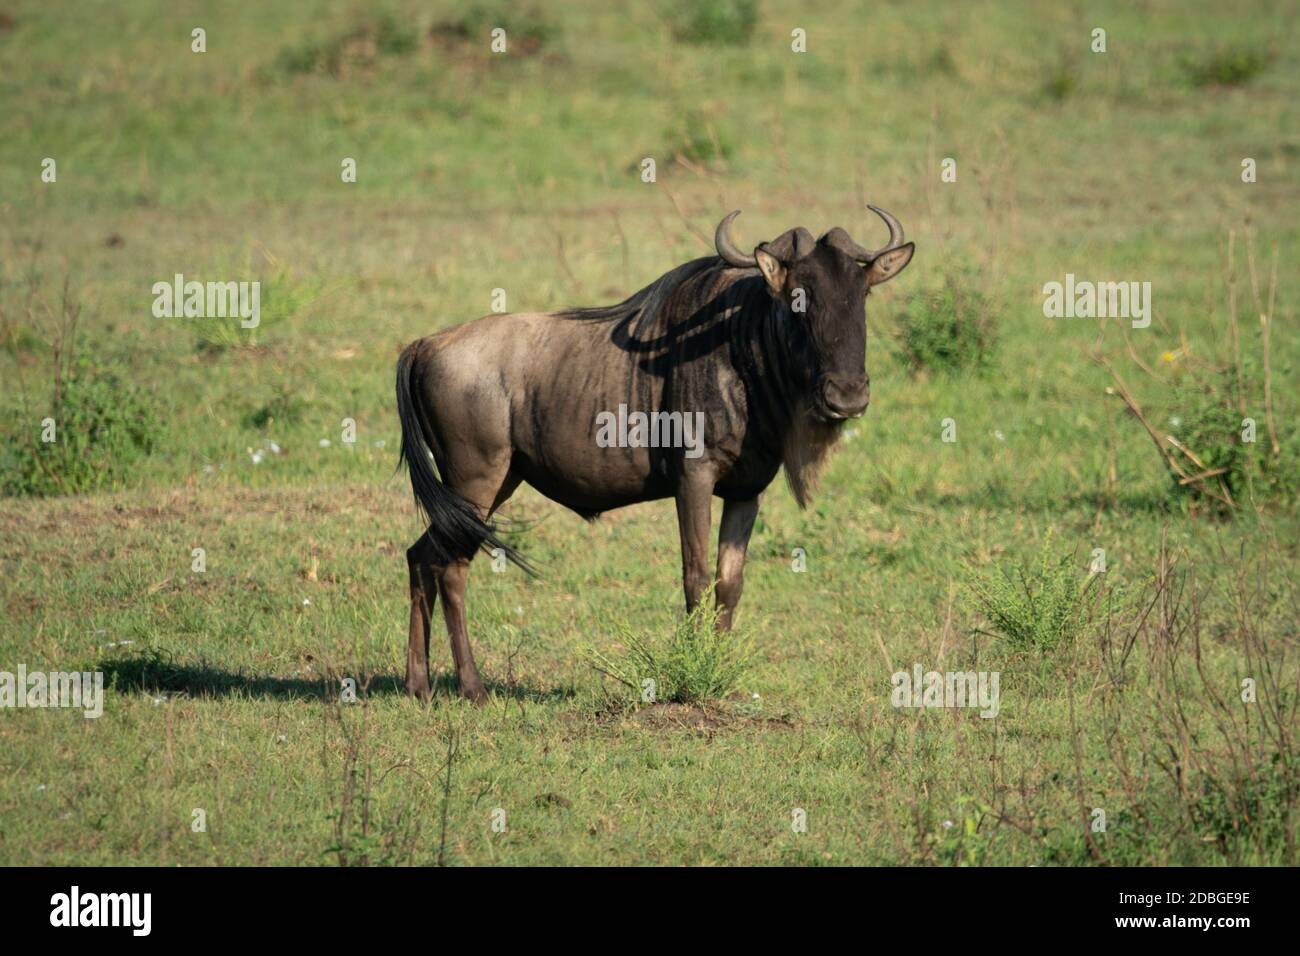 Blue wildebeest stands casting shadow on savannah Stock Photo